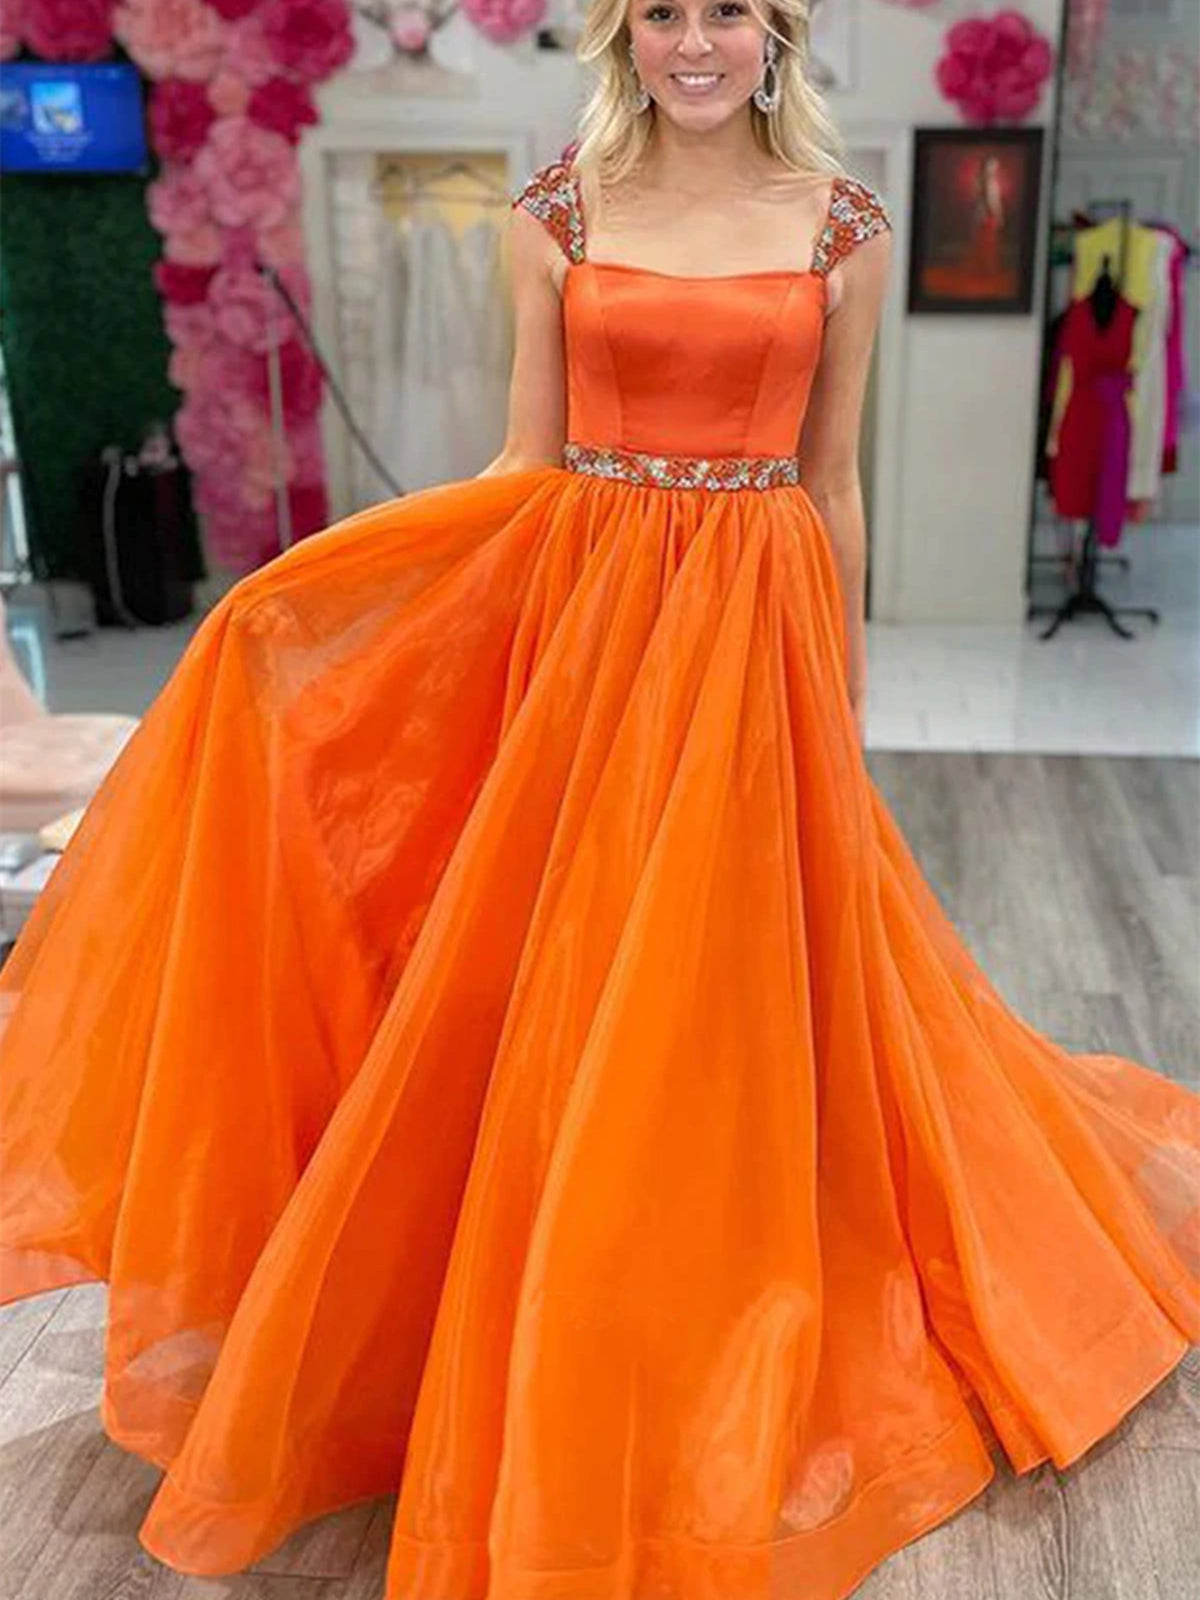 Long A-line Tulle Prom Dress with Cap Sleeves Orange Formal Graduation Evening Dresses-BIZTUNNEL